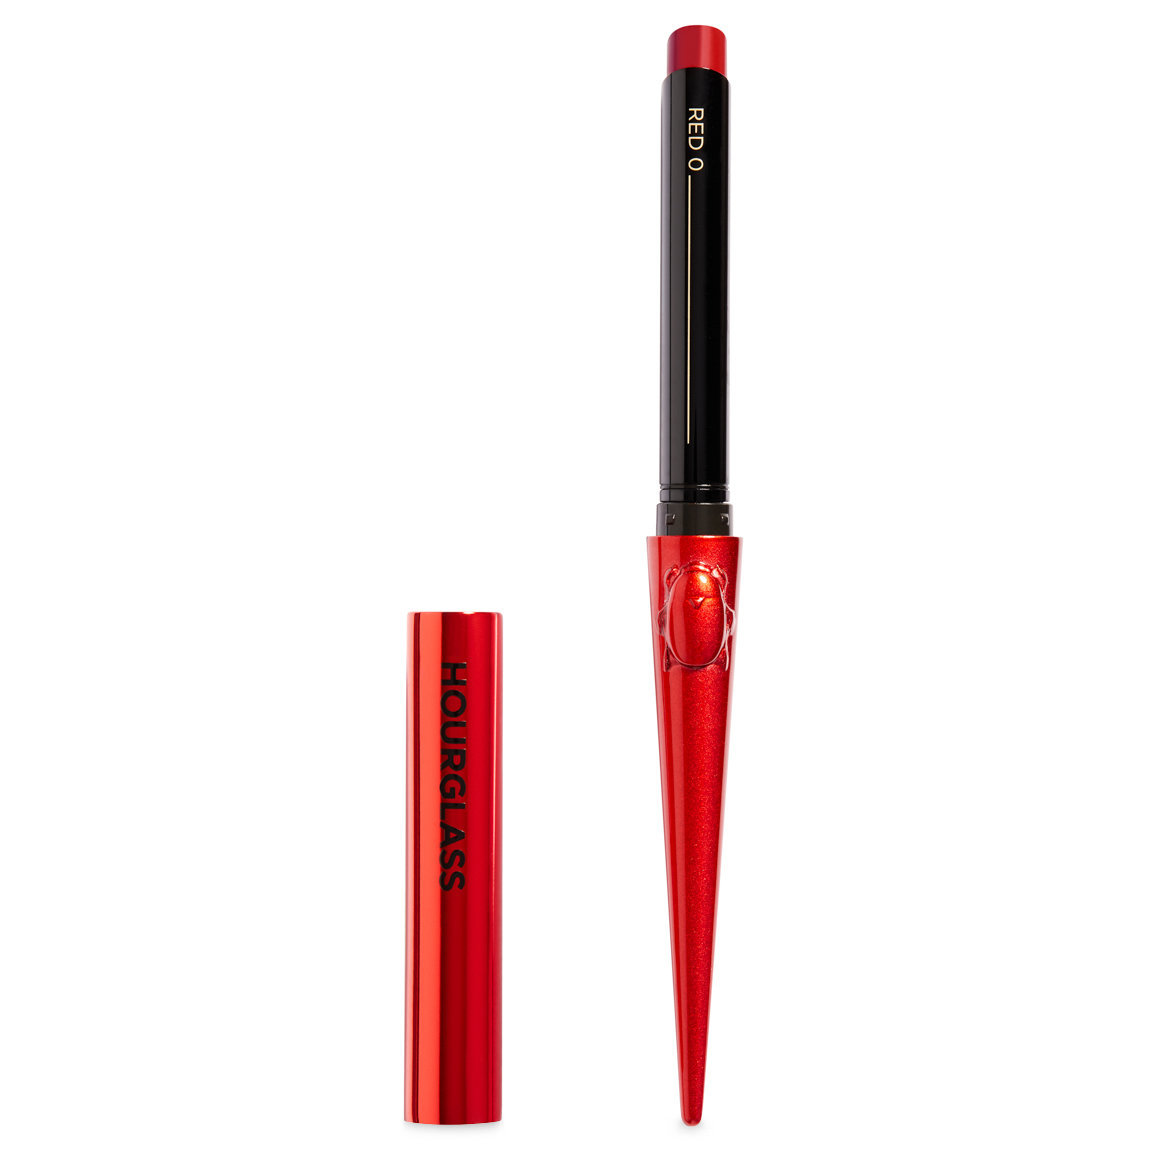 Hourglass Confession Ultra Slim High Intensity Refillable Lipstick - Red 0 alternative view 1 - product swatch.